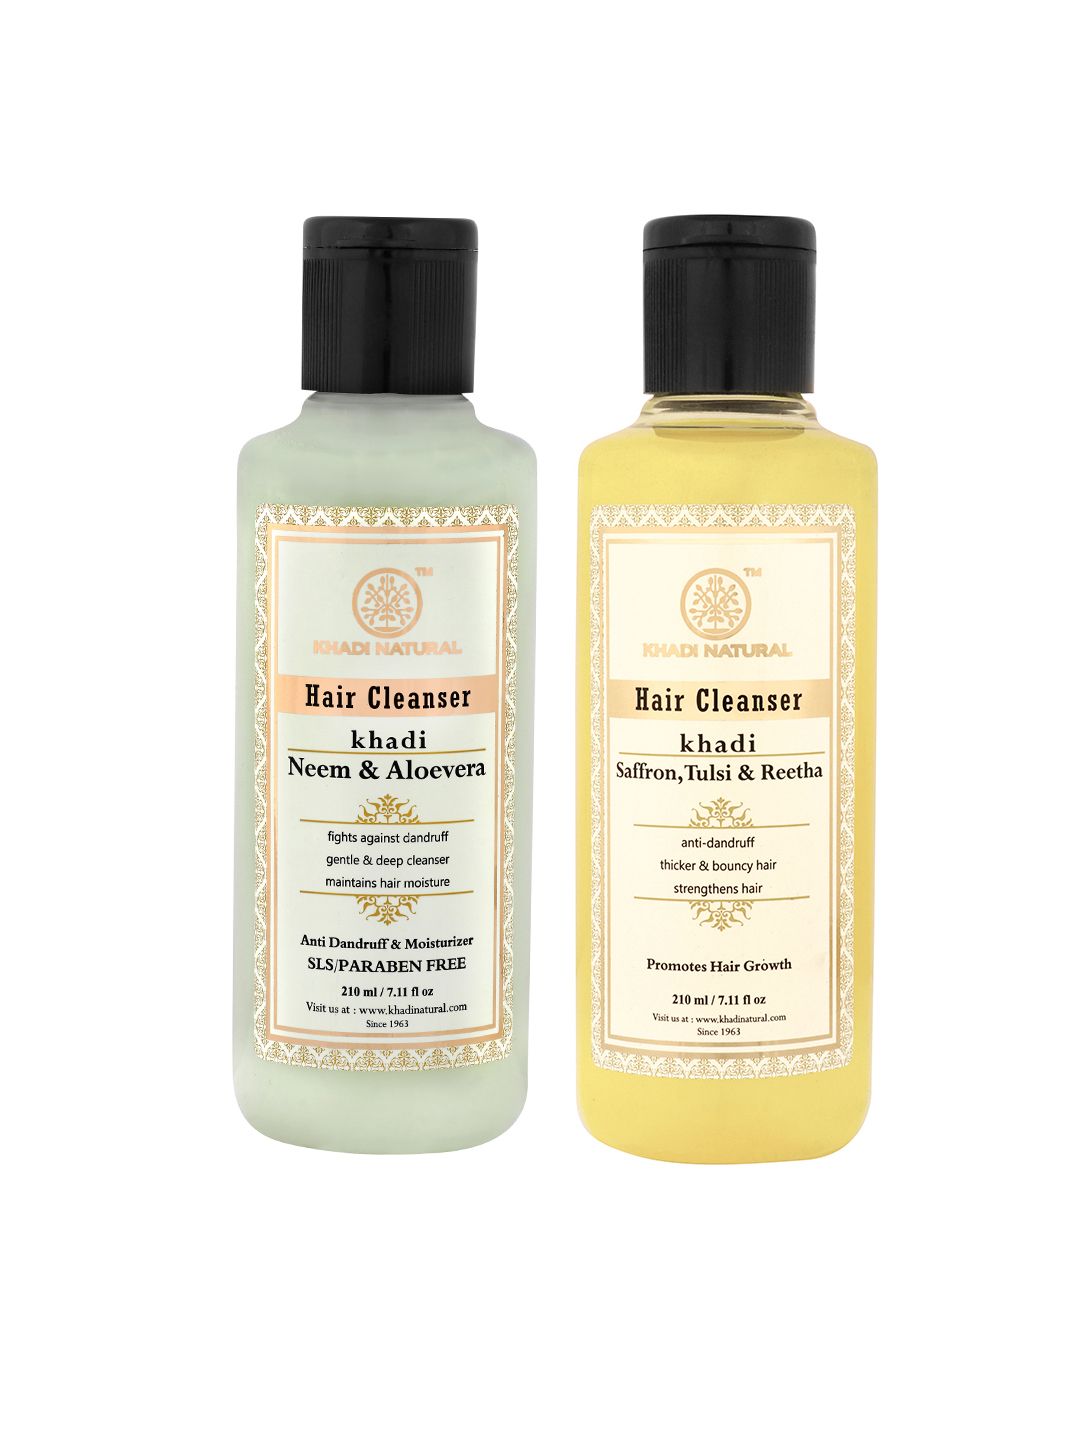 Khadi Natural Unisex Set of 2 Hair Cleansers Price in India